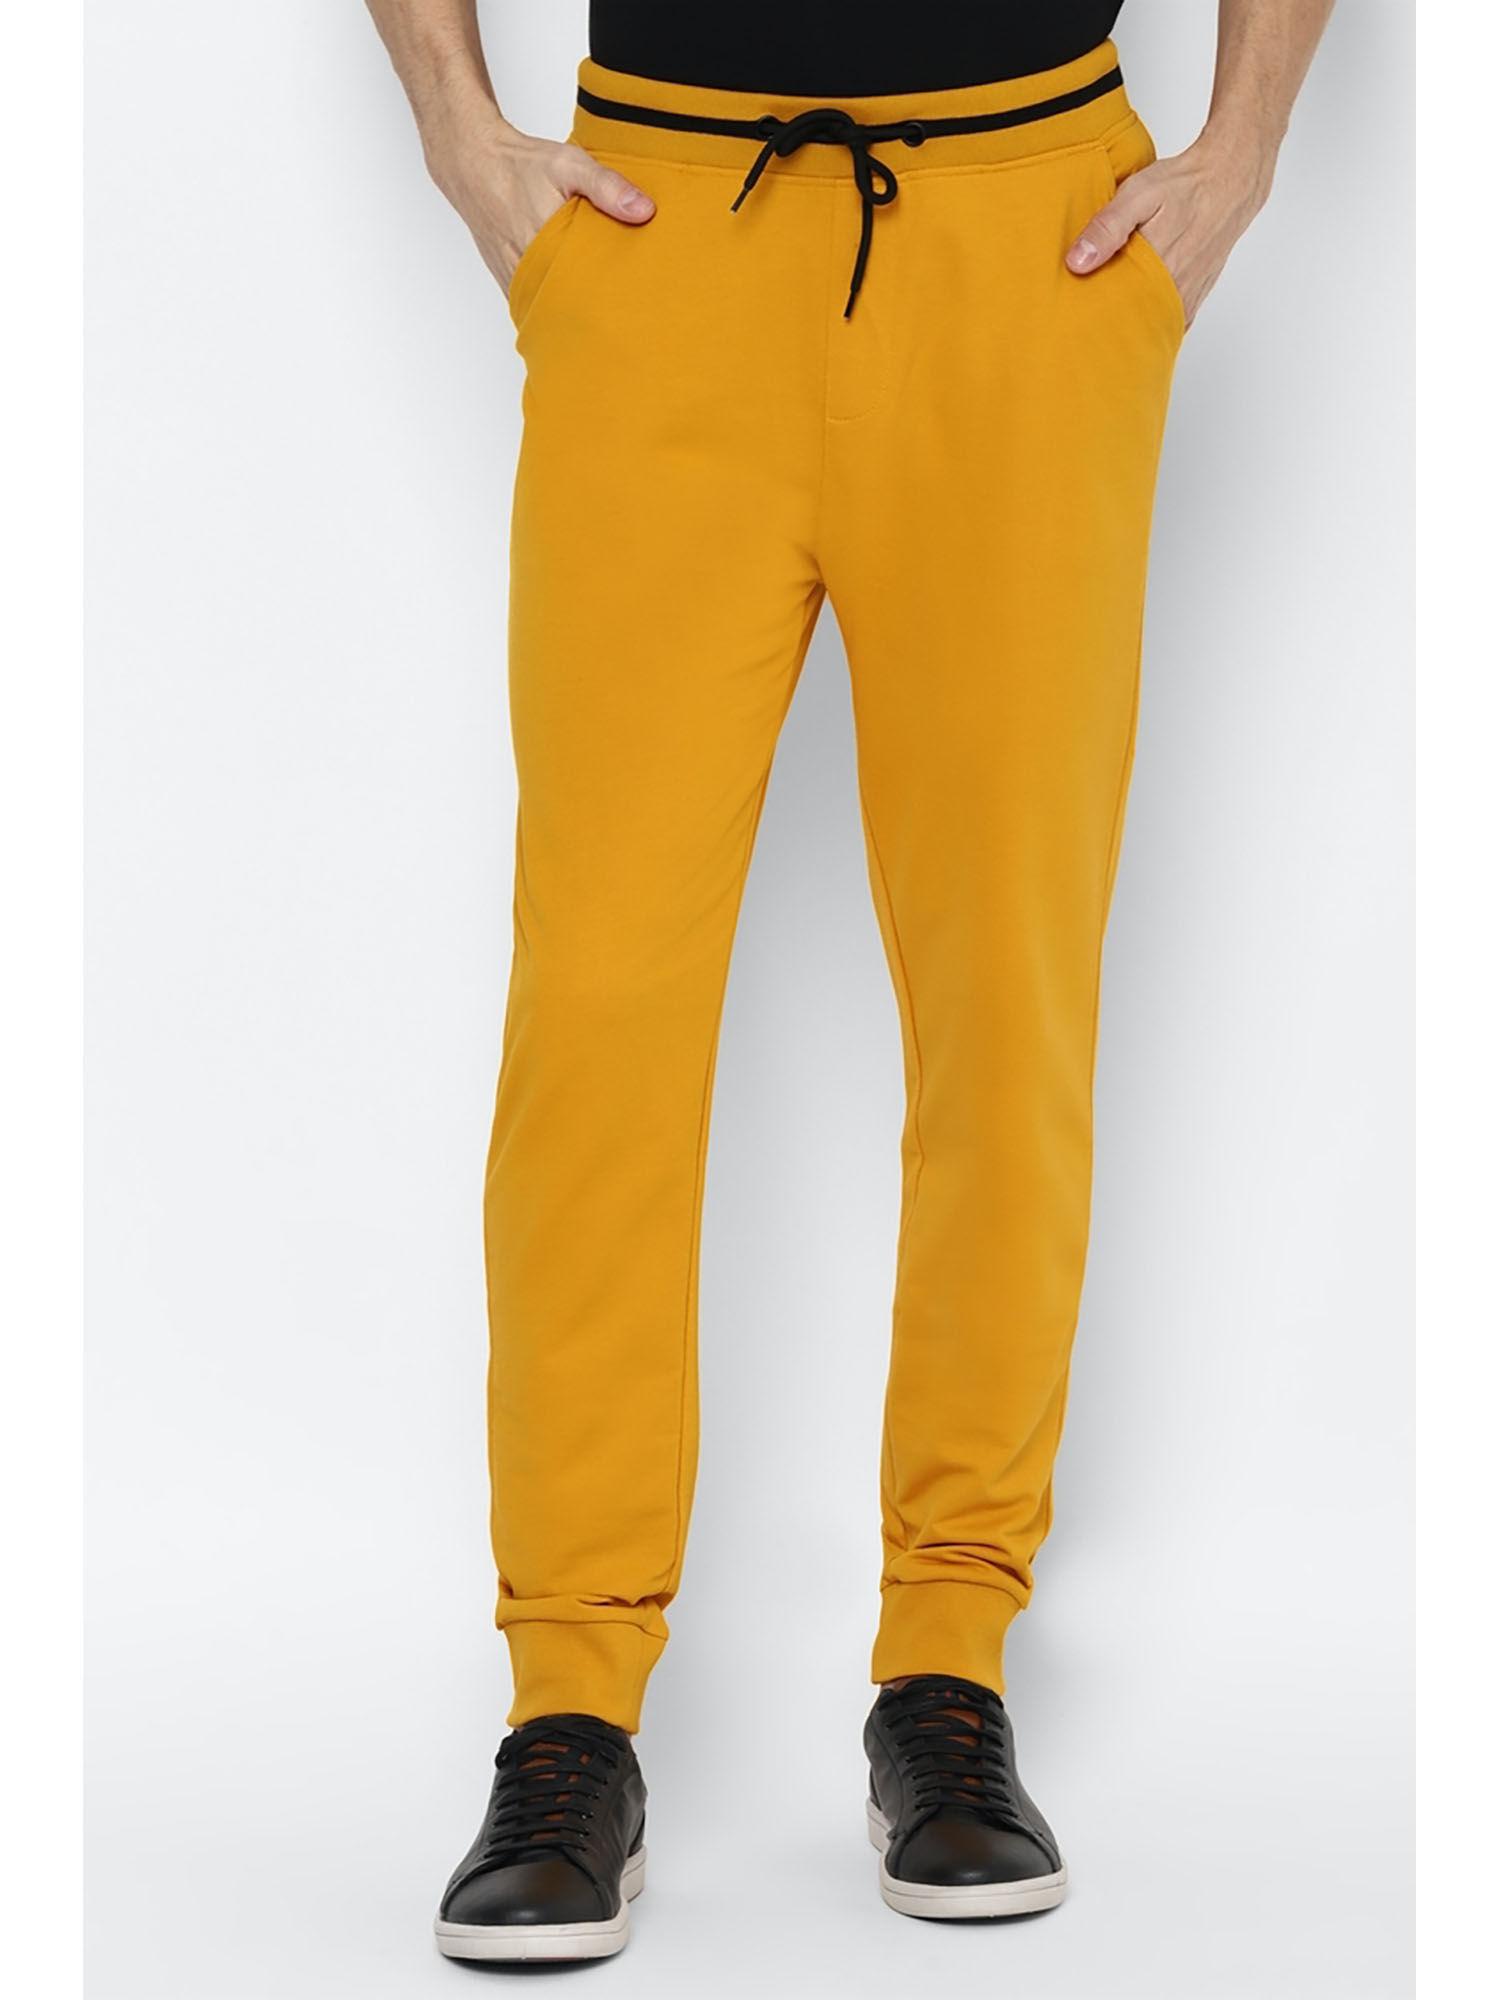 solid yellow solid pants